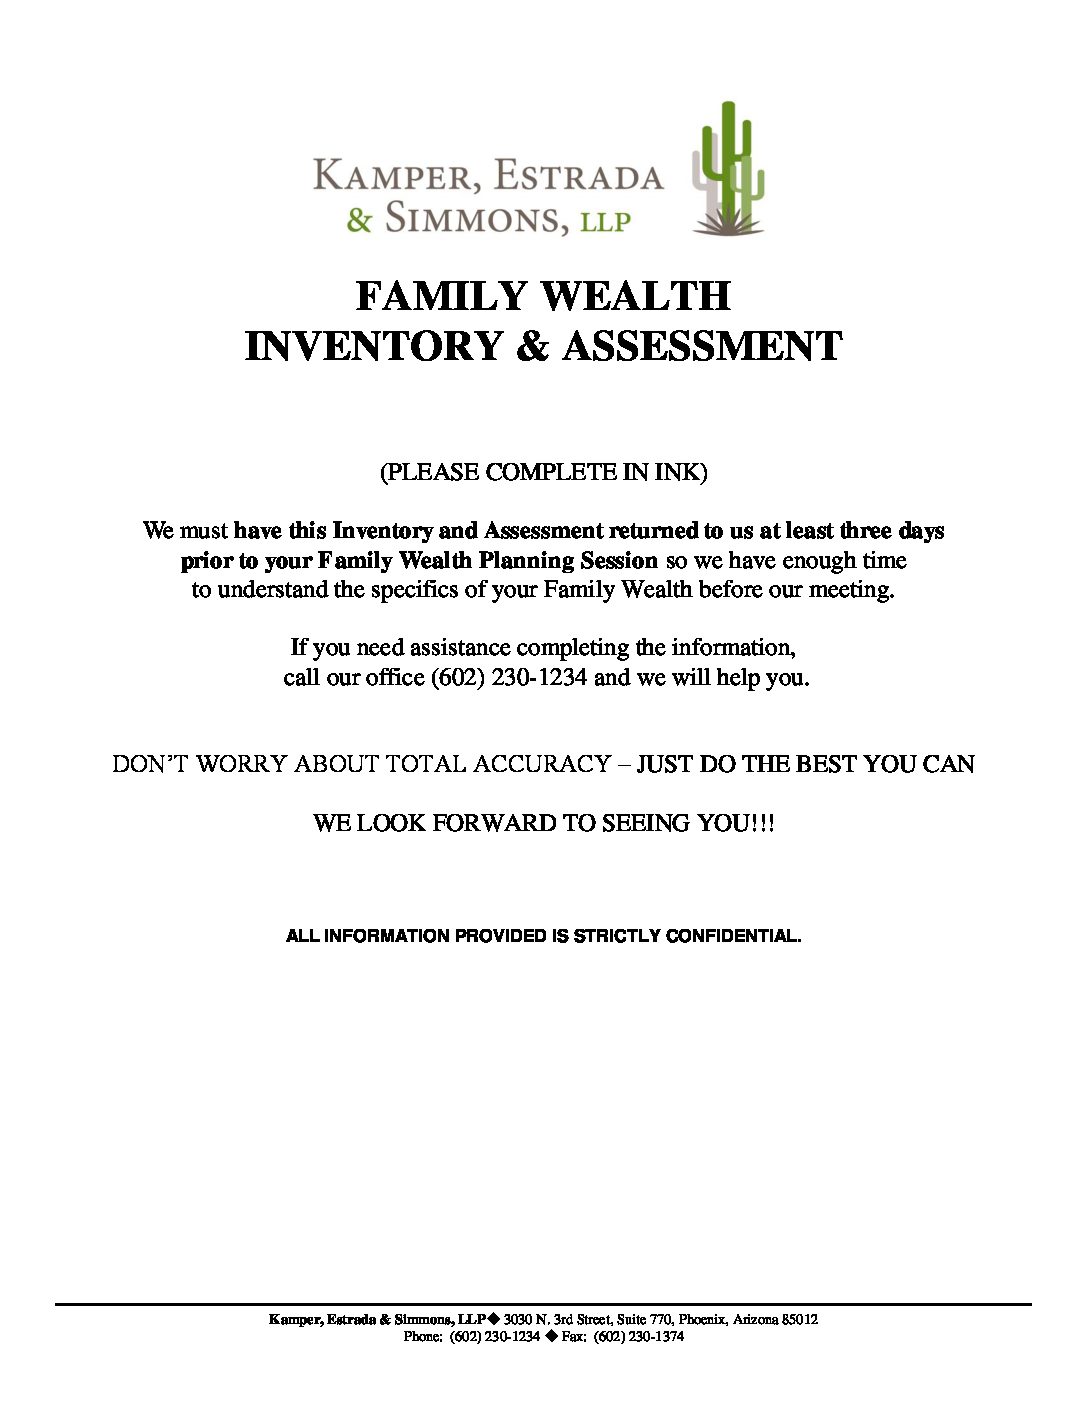 Family Wealth and Inventory Assessment  